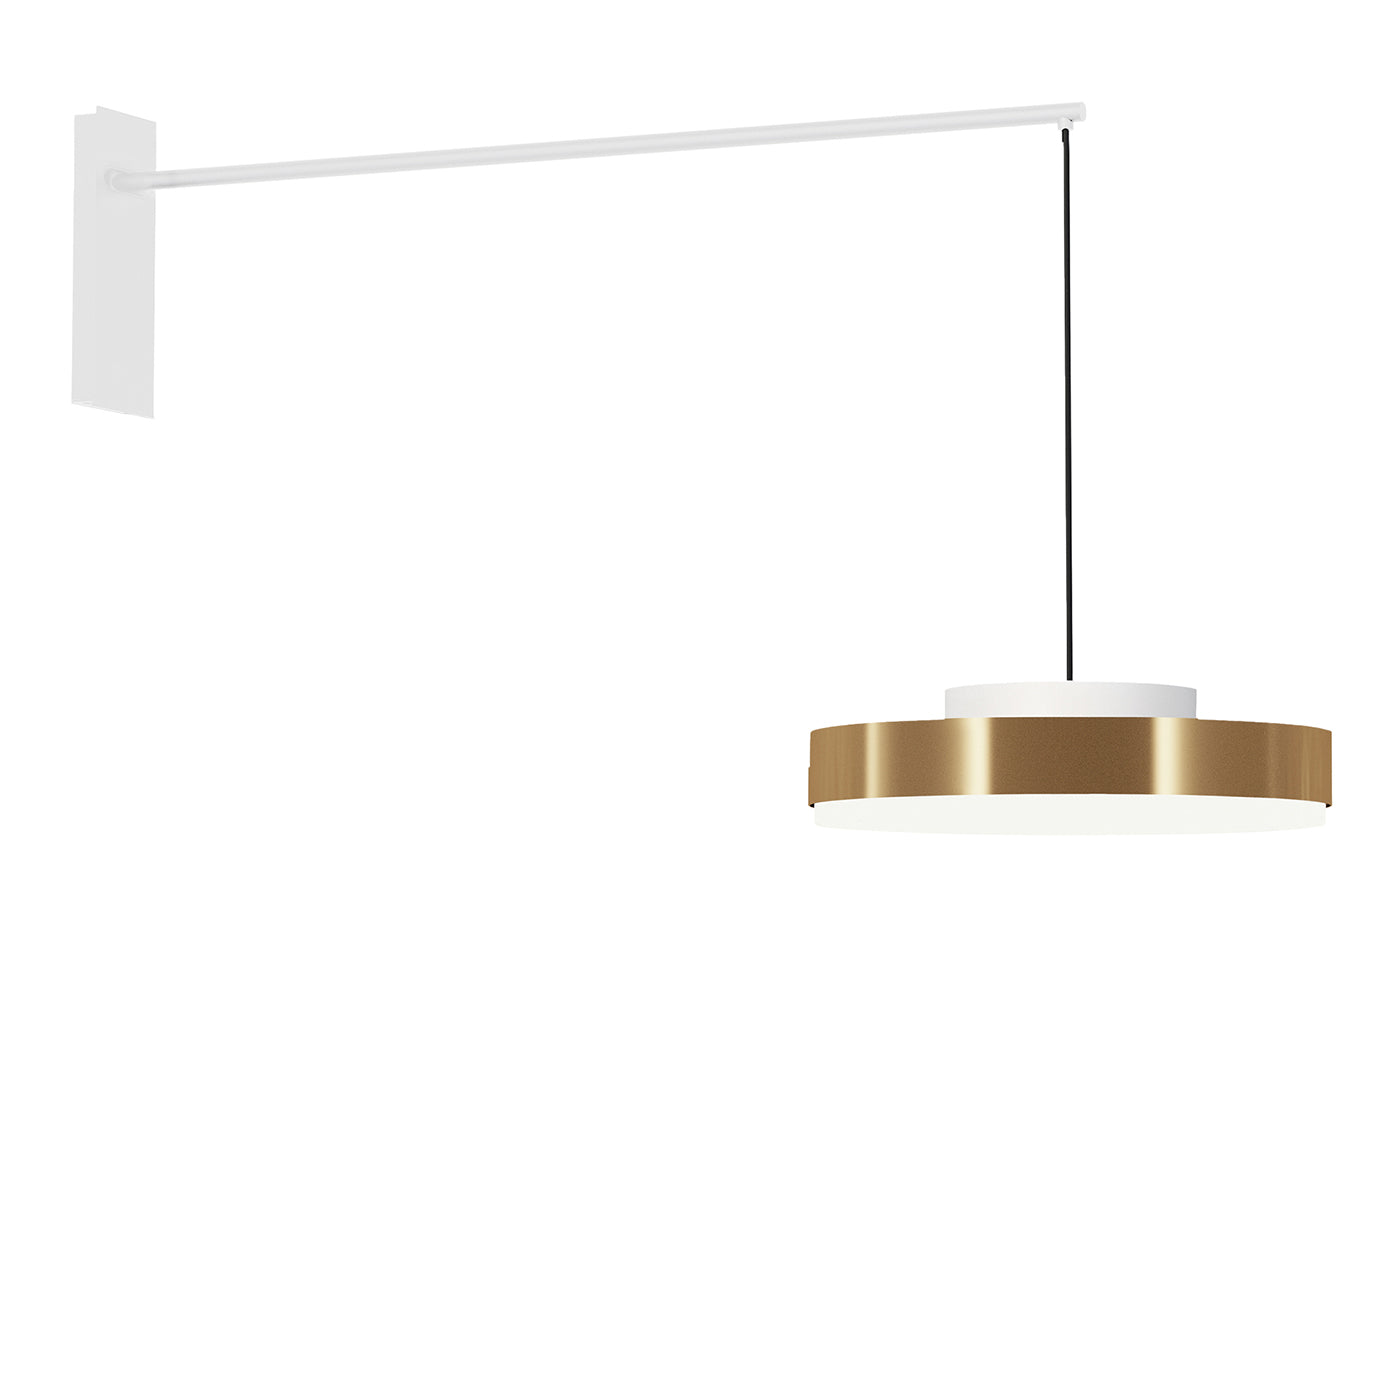 Discus AP Large Brass & White Wall Lamp by MKV Design - Main view